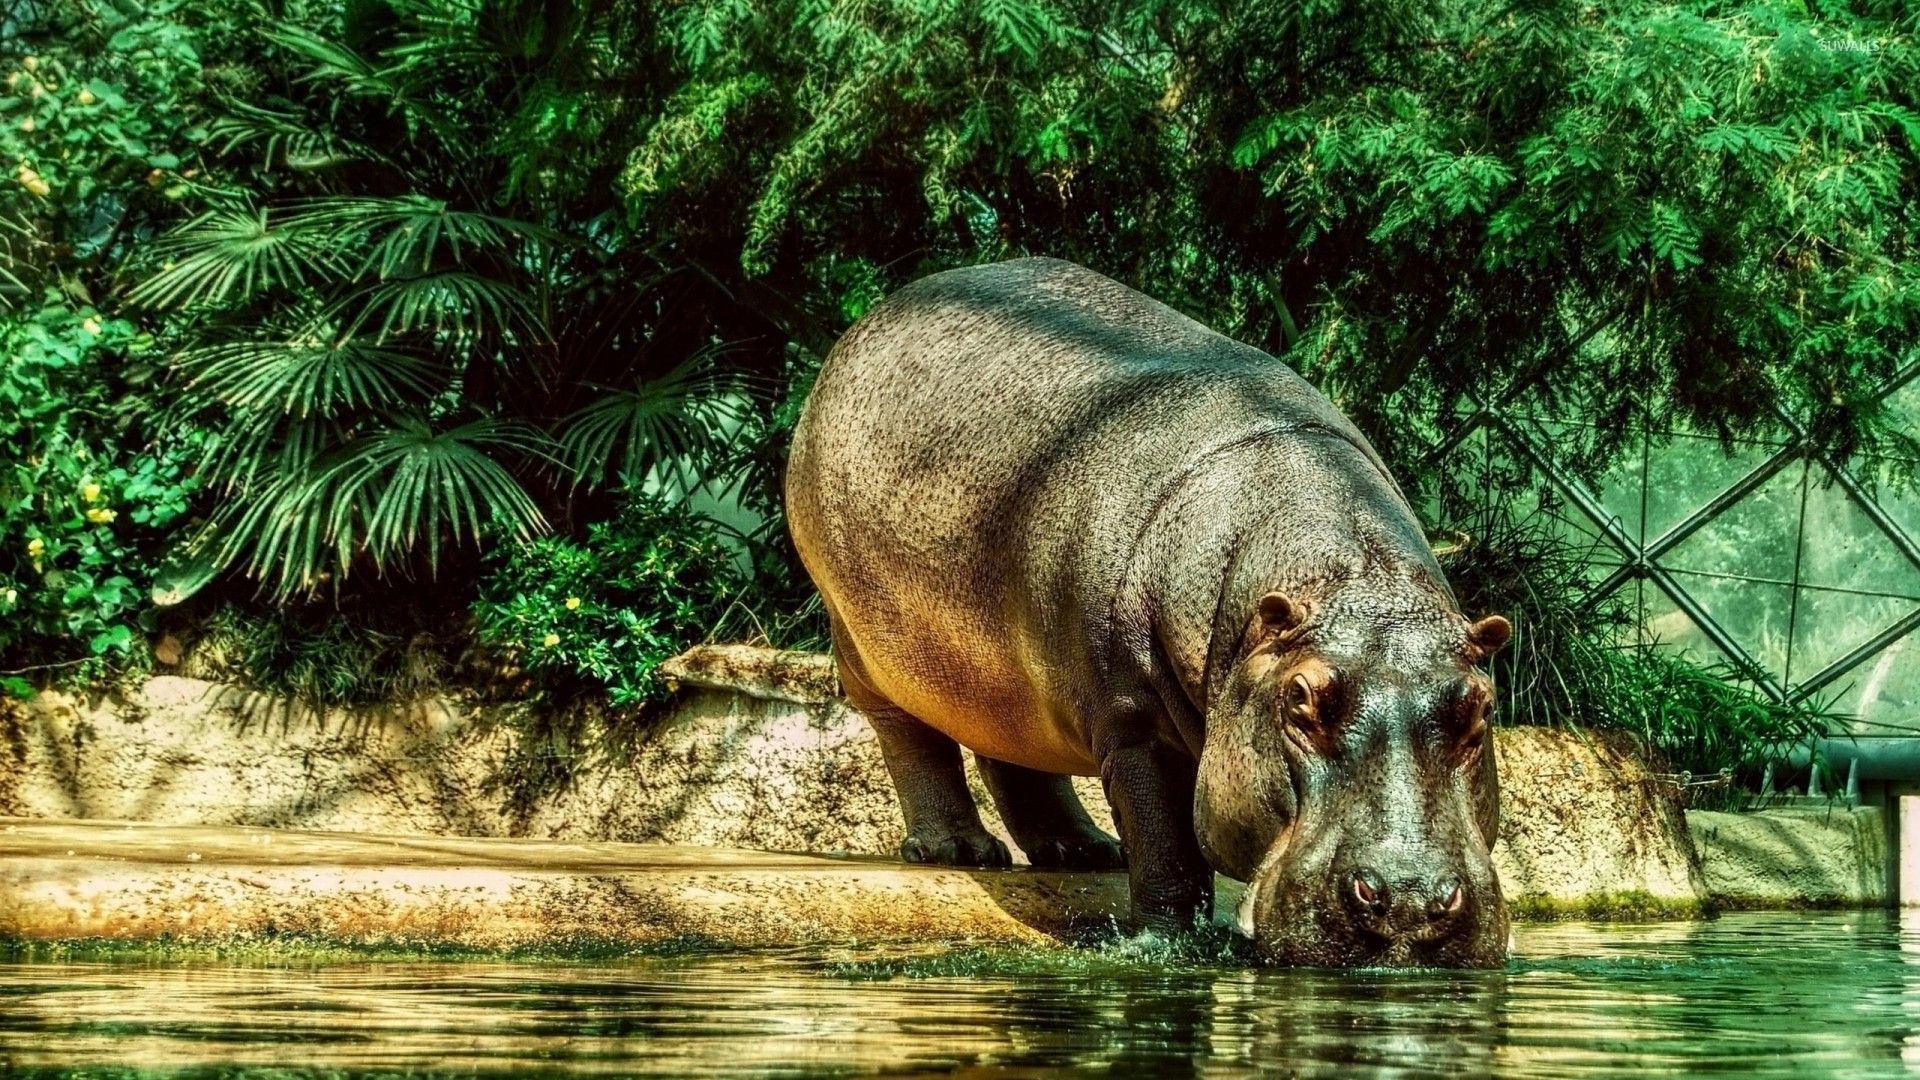 Hippo drinking water wallpaper, Animal wallpapers, Nature's beauty, Refreshing imagery, 1920x1080 Full HD Desktop